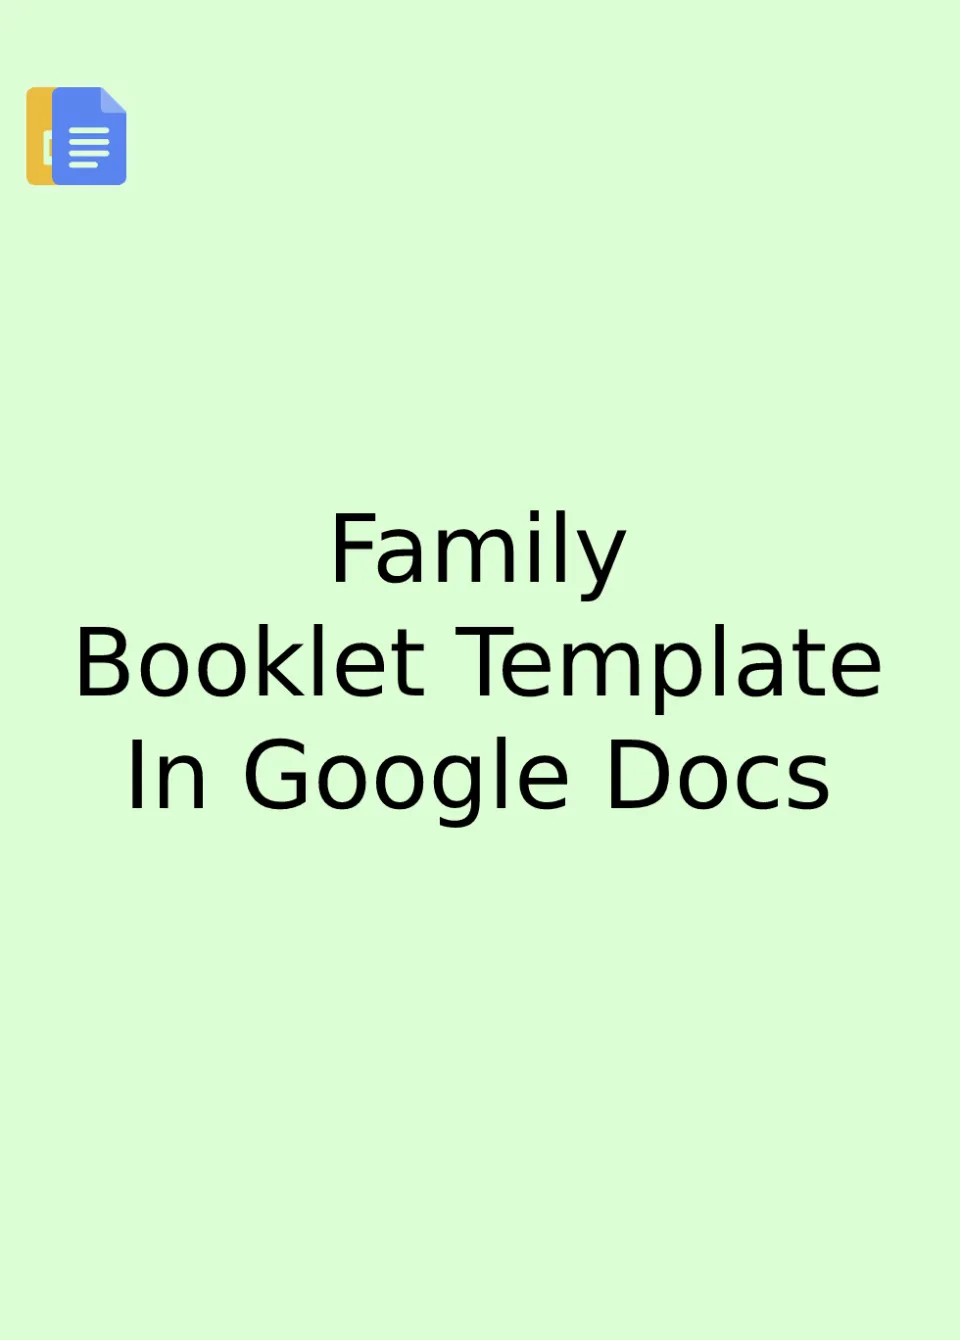 Family Booklet Template Google Docs